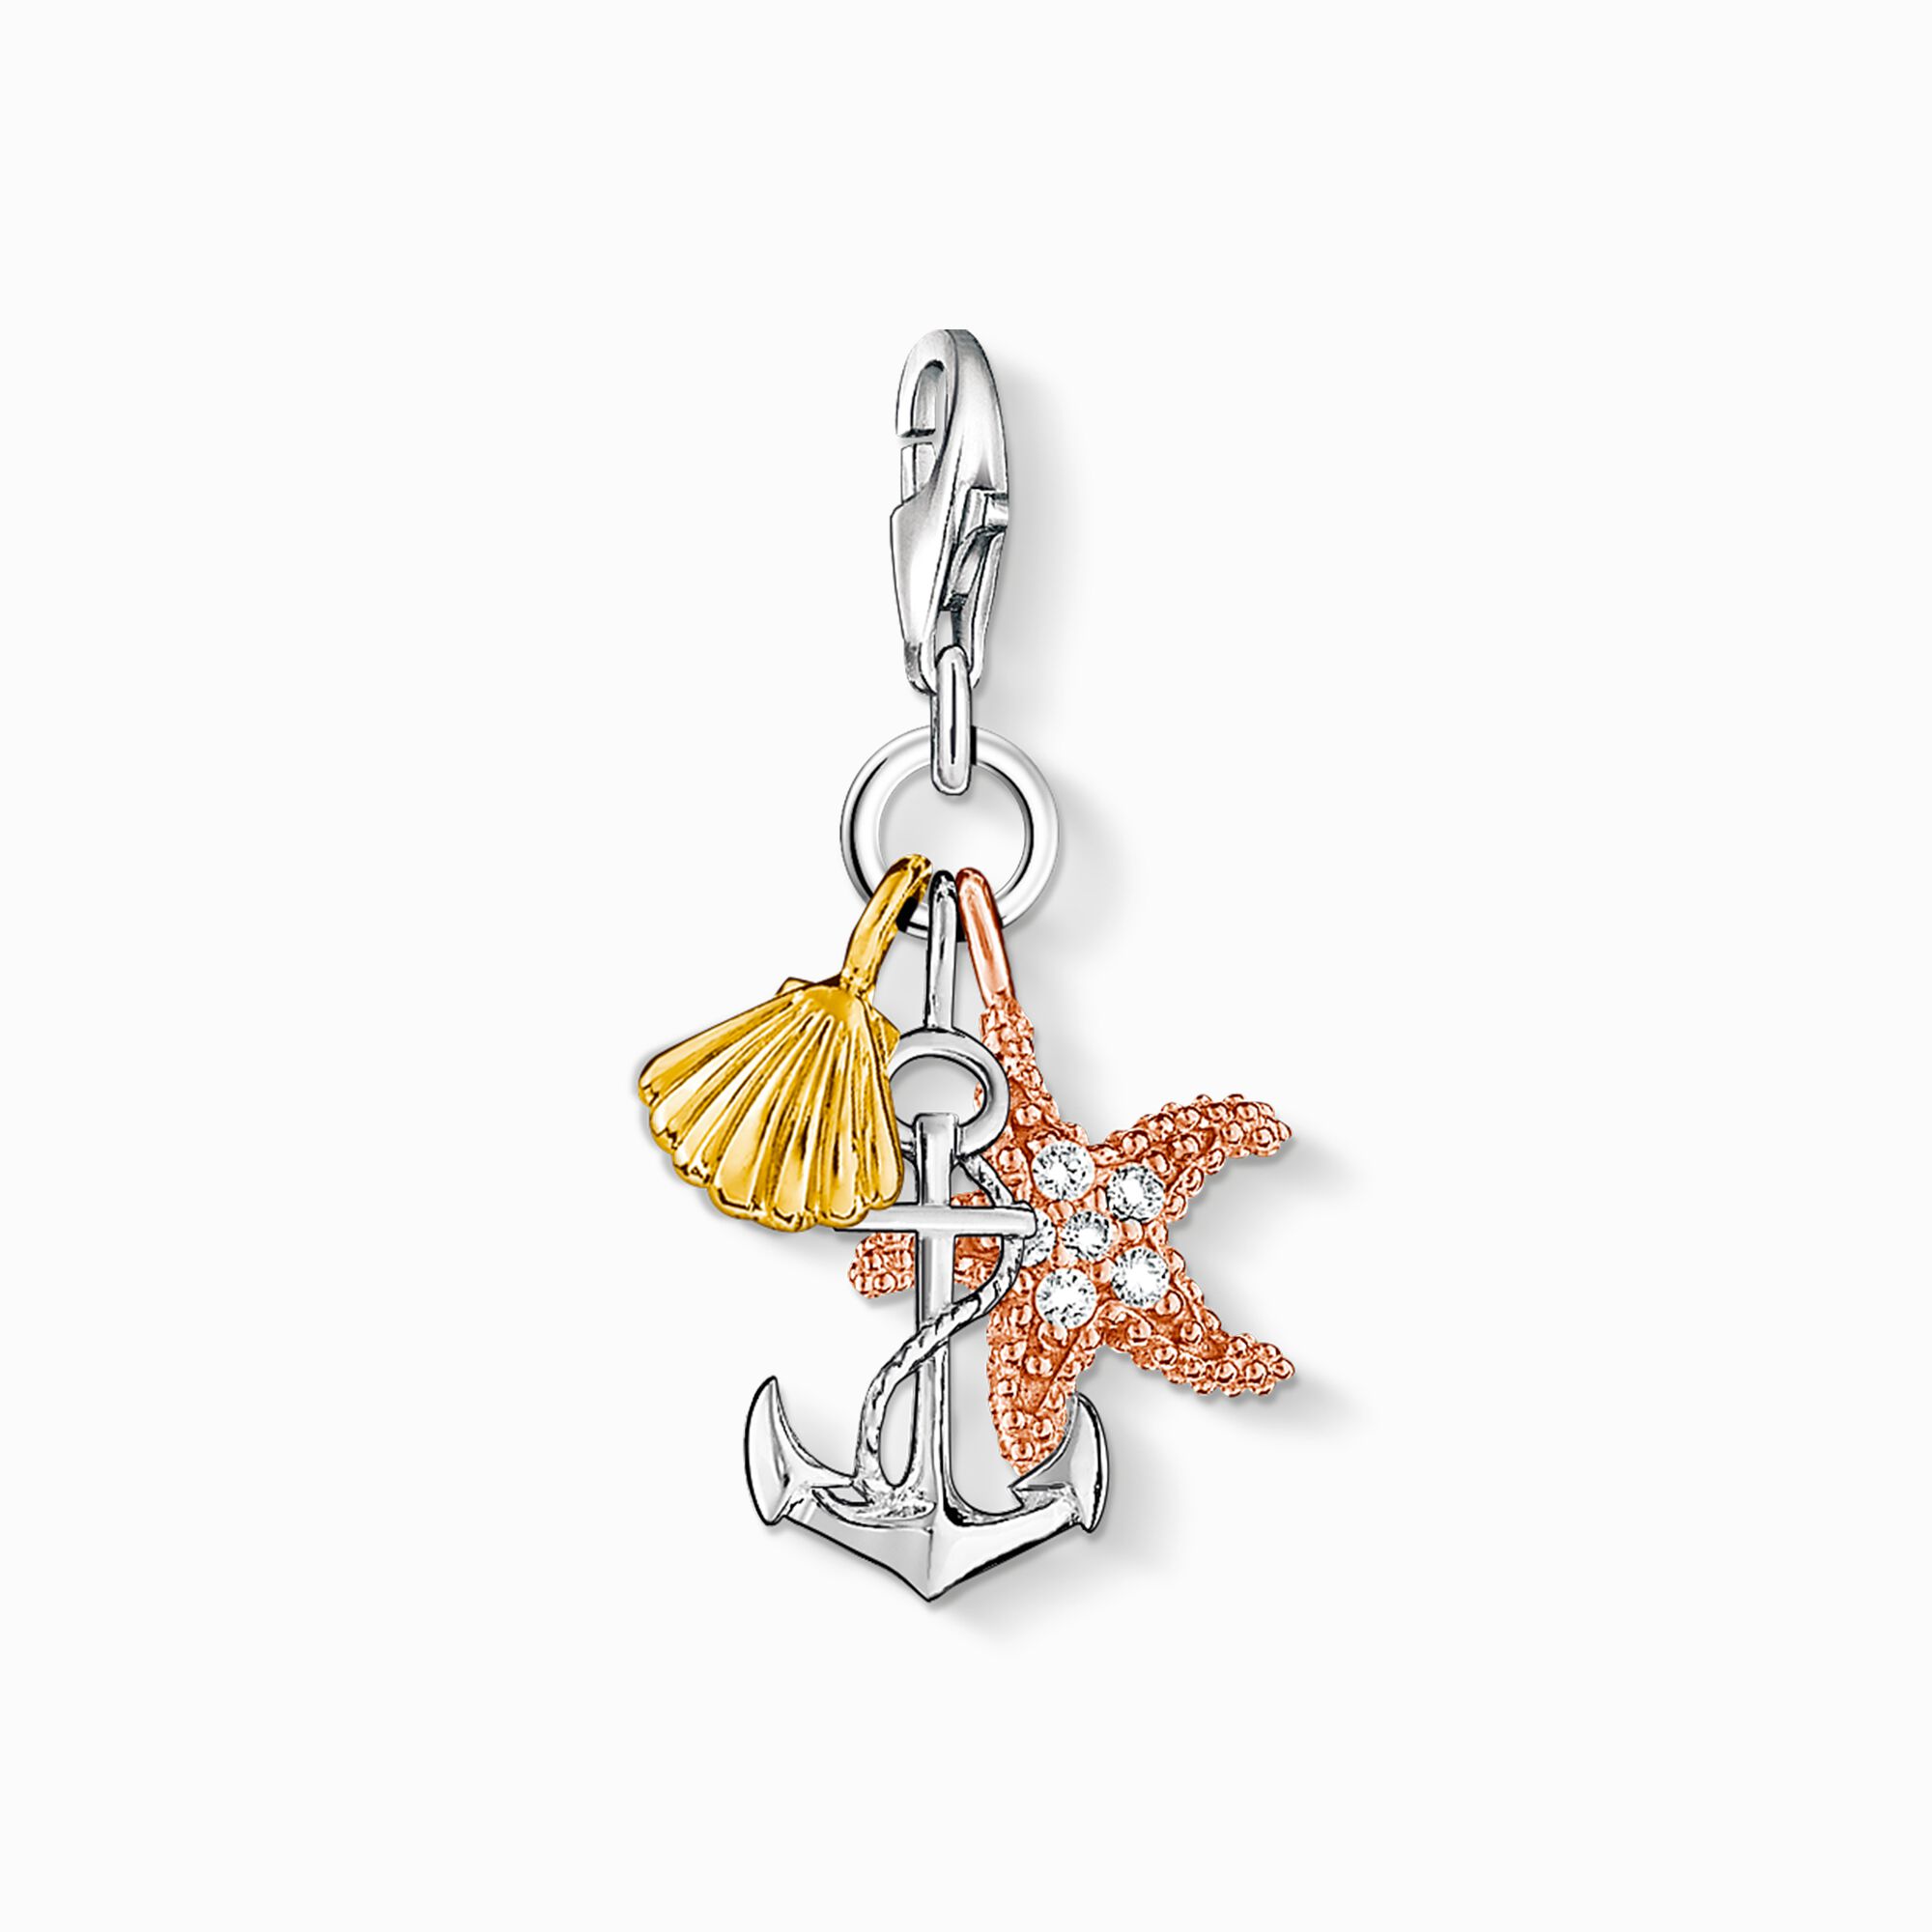 Charm pendant summer / beach from the Charm Club collection in the THOMAS SABO online store